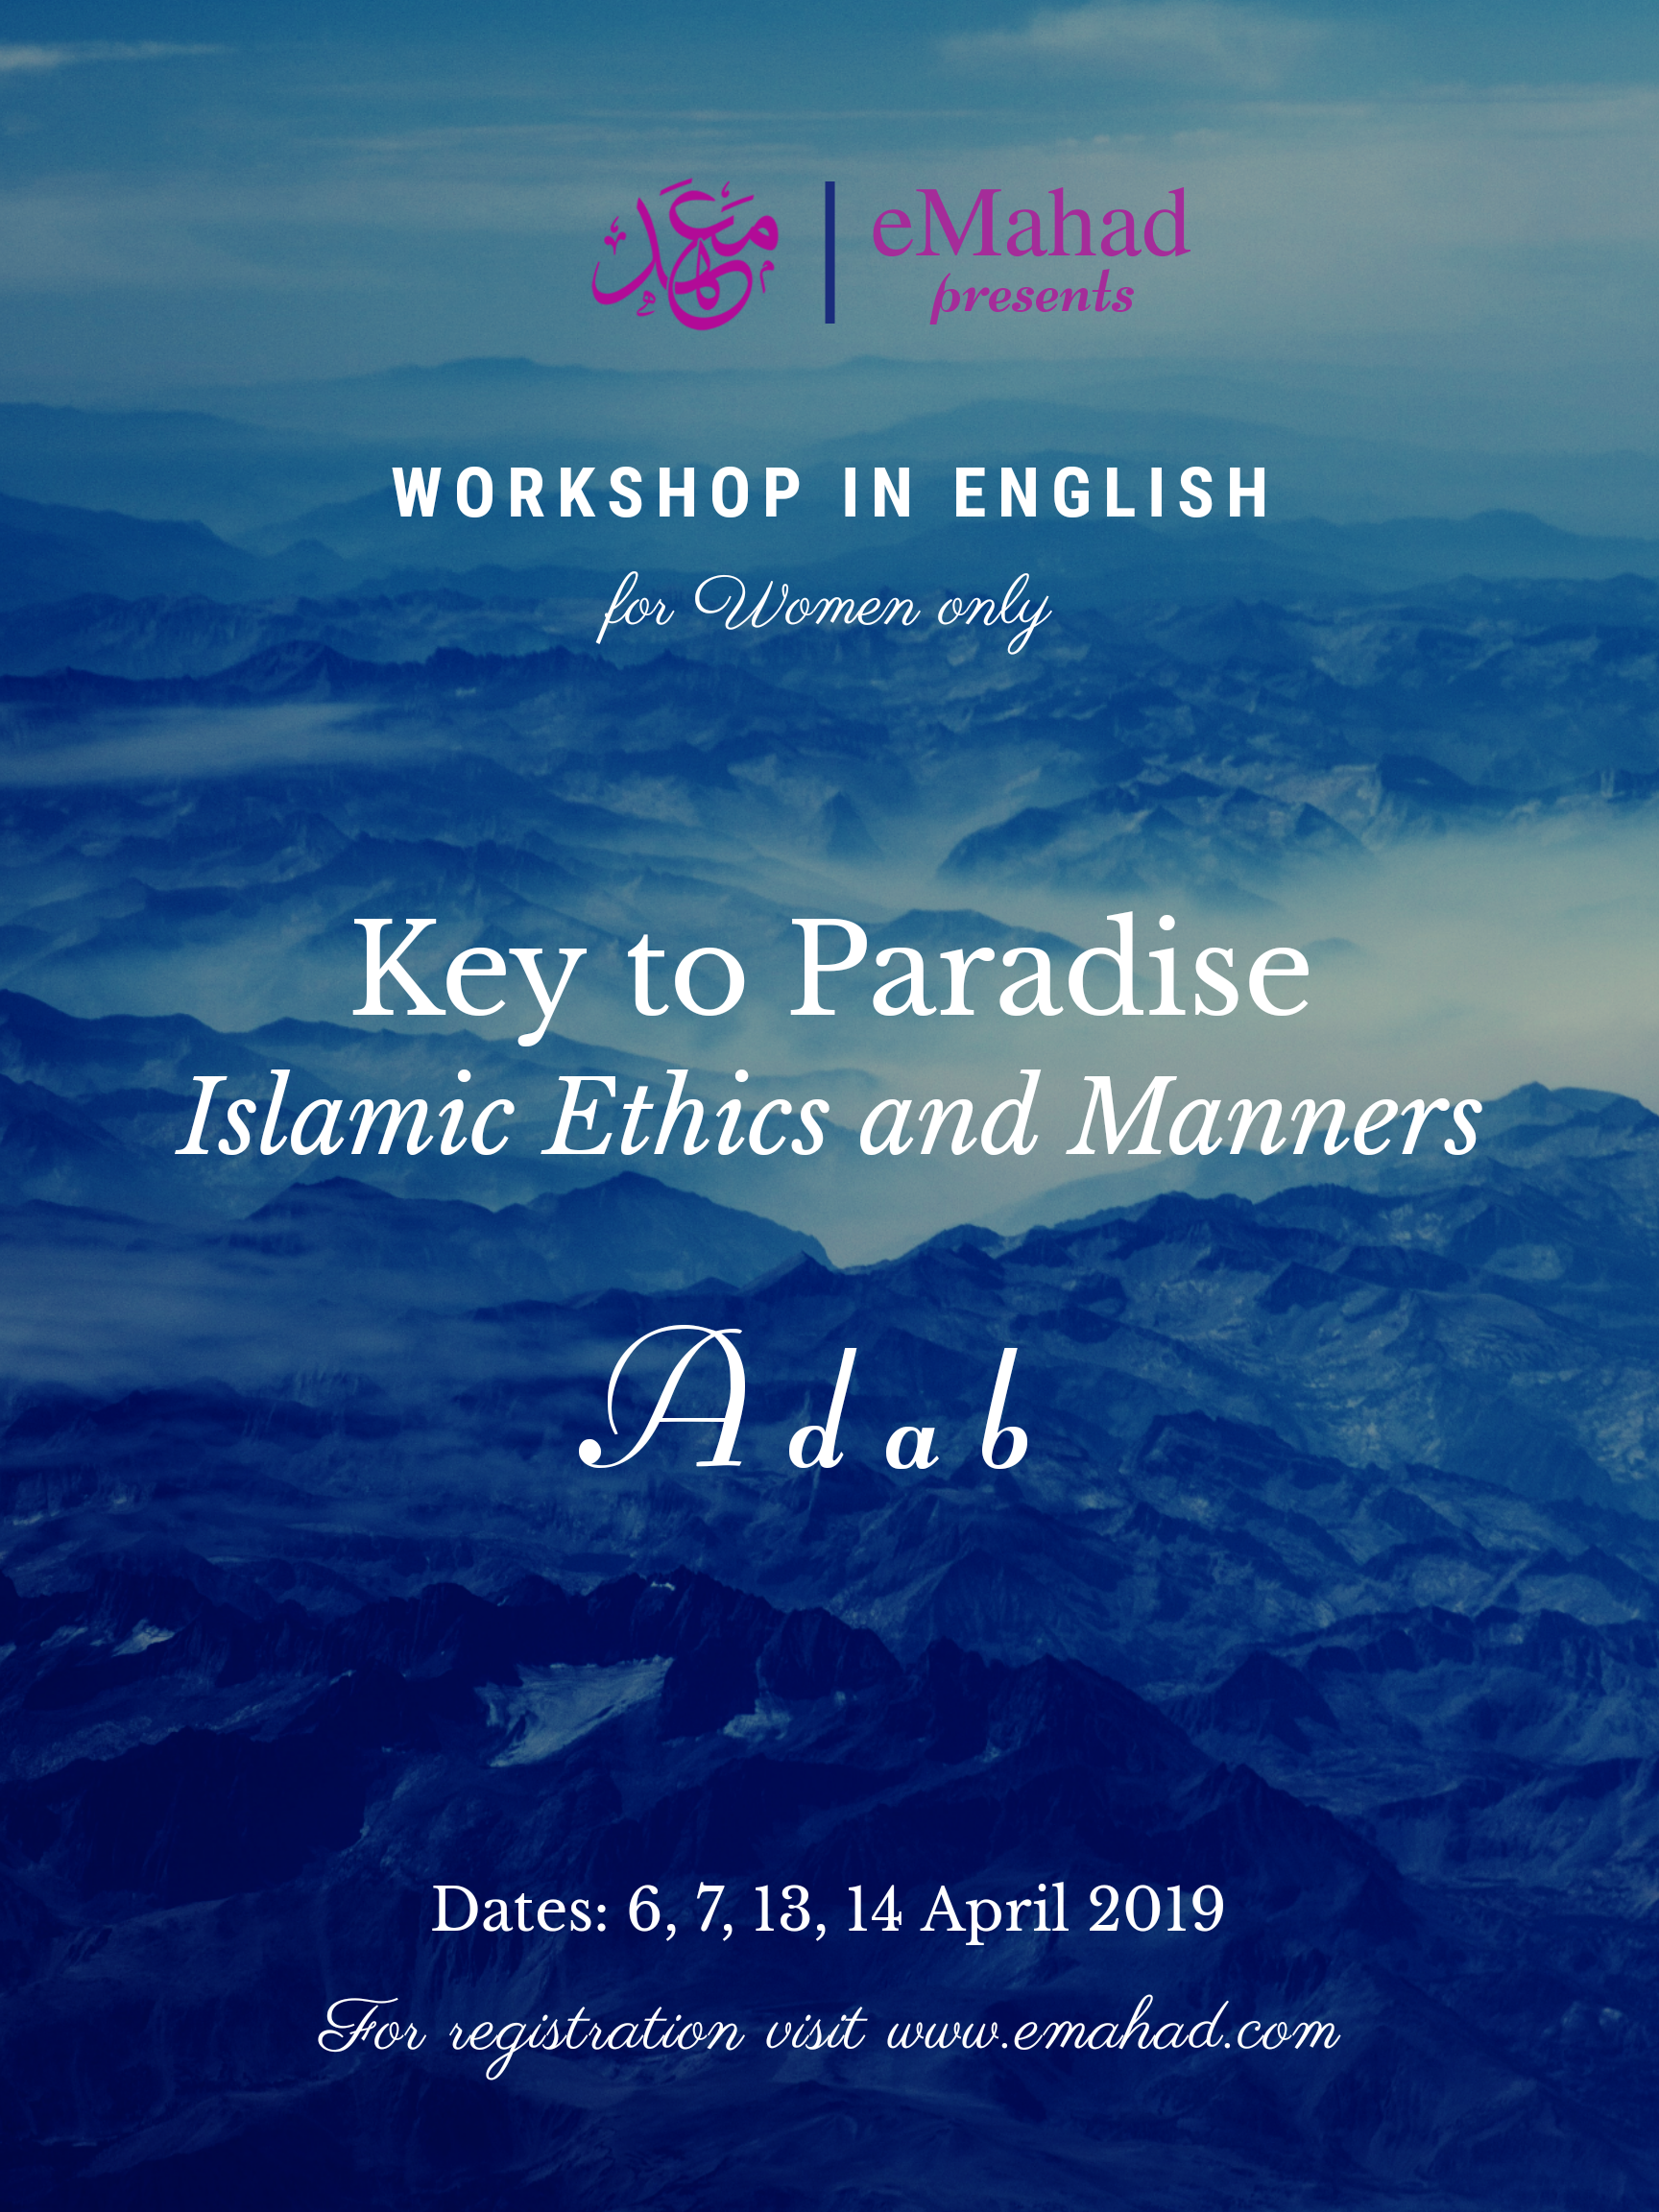 Key to Paradise -Islamic Ethics and Manners